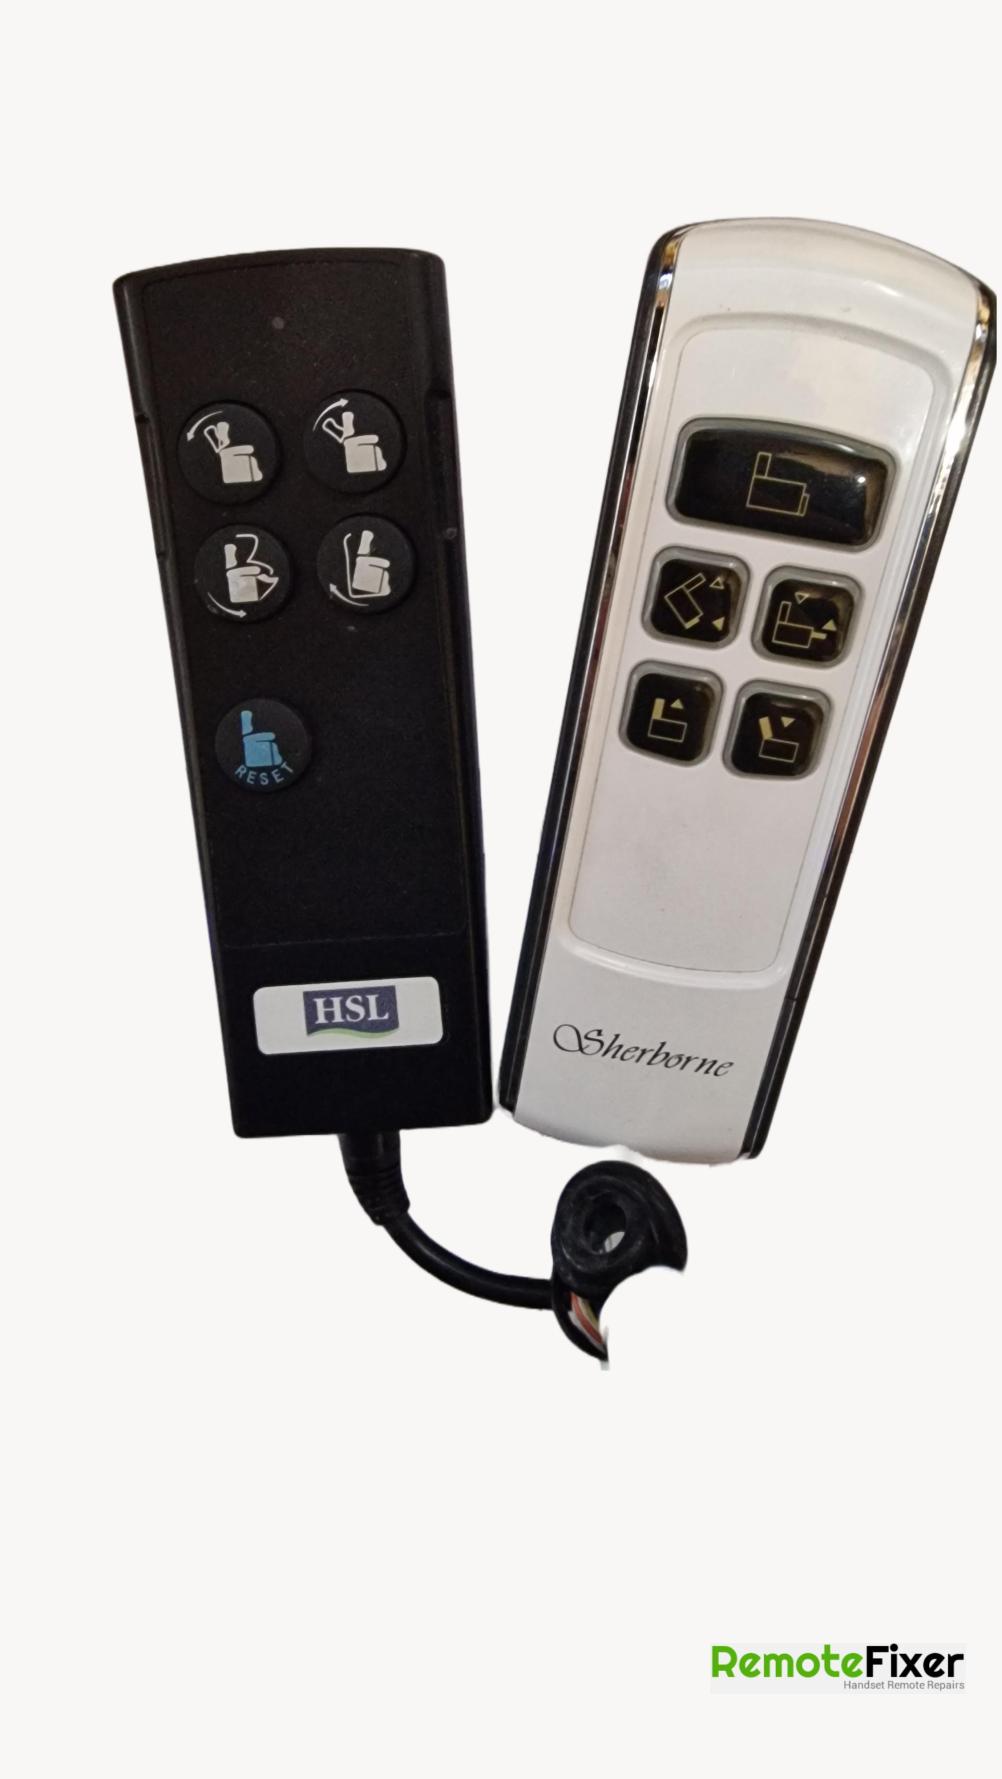 1 x HSL chair remote, 1 x Sherborne chair remote  Remote Control - Front Image